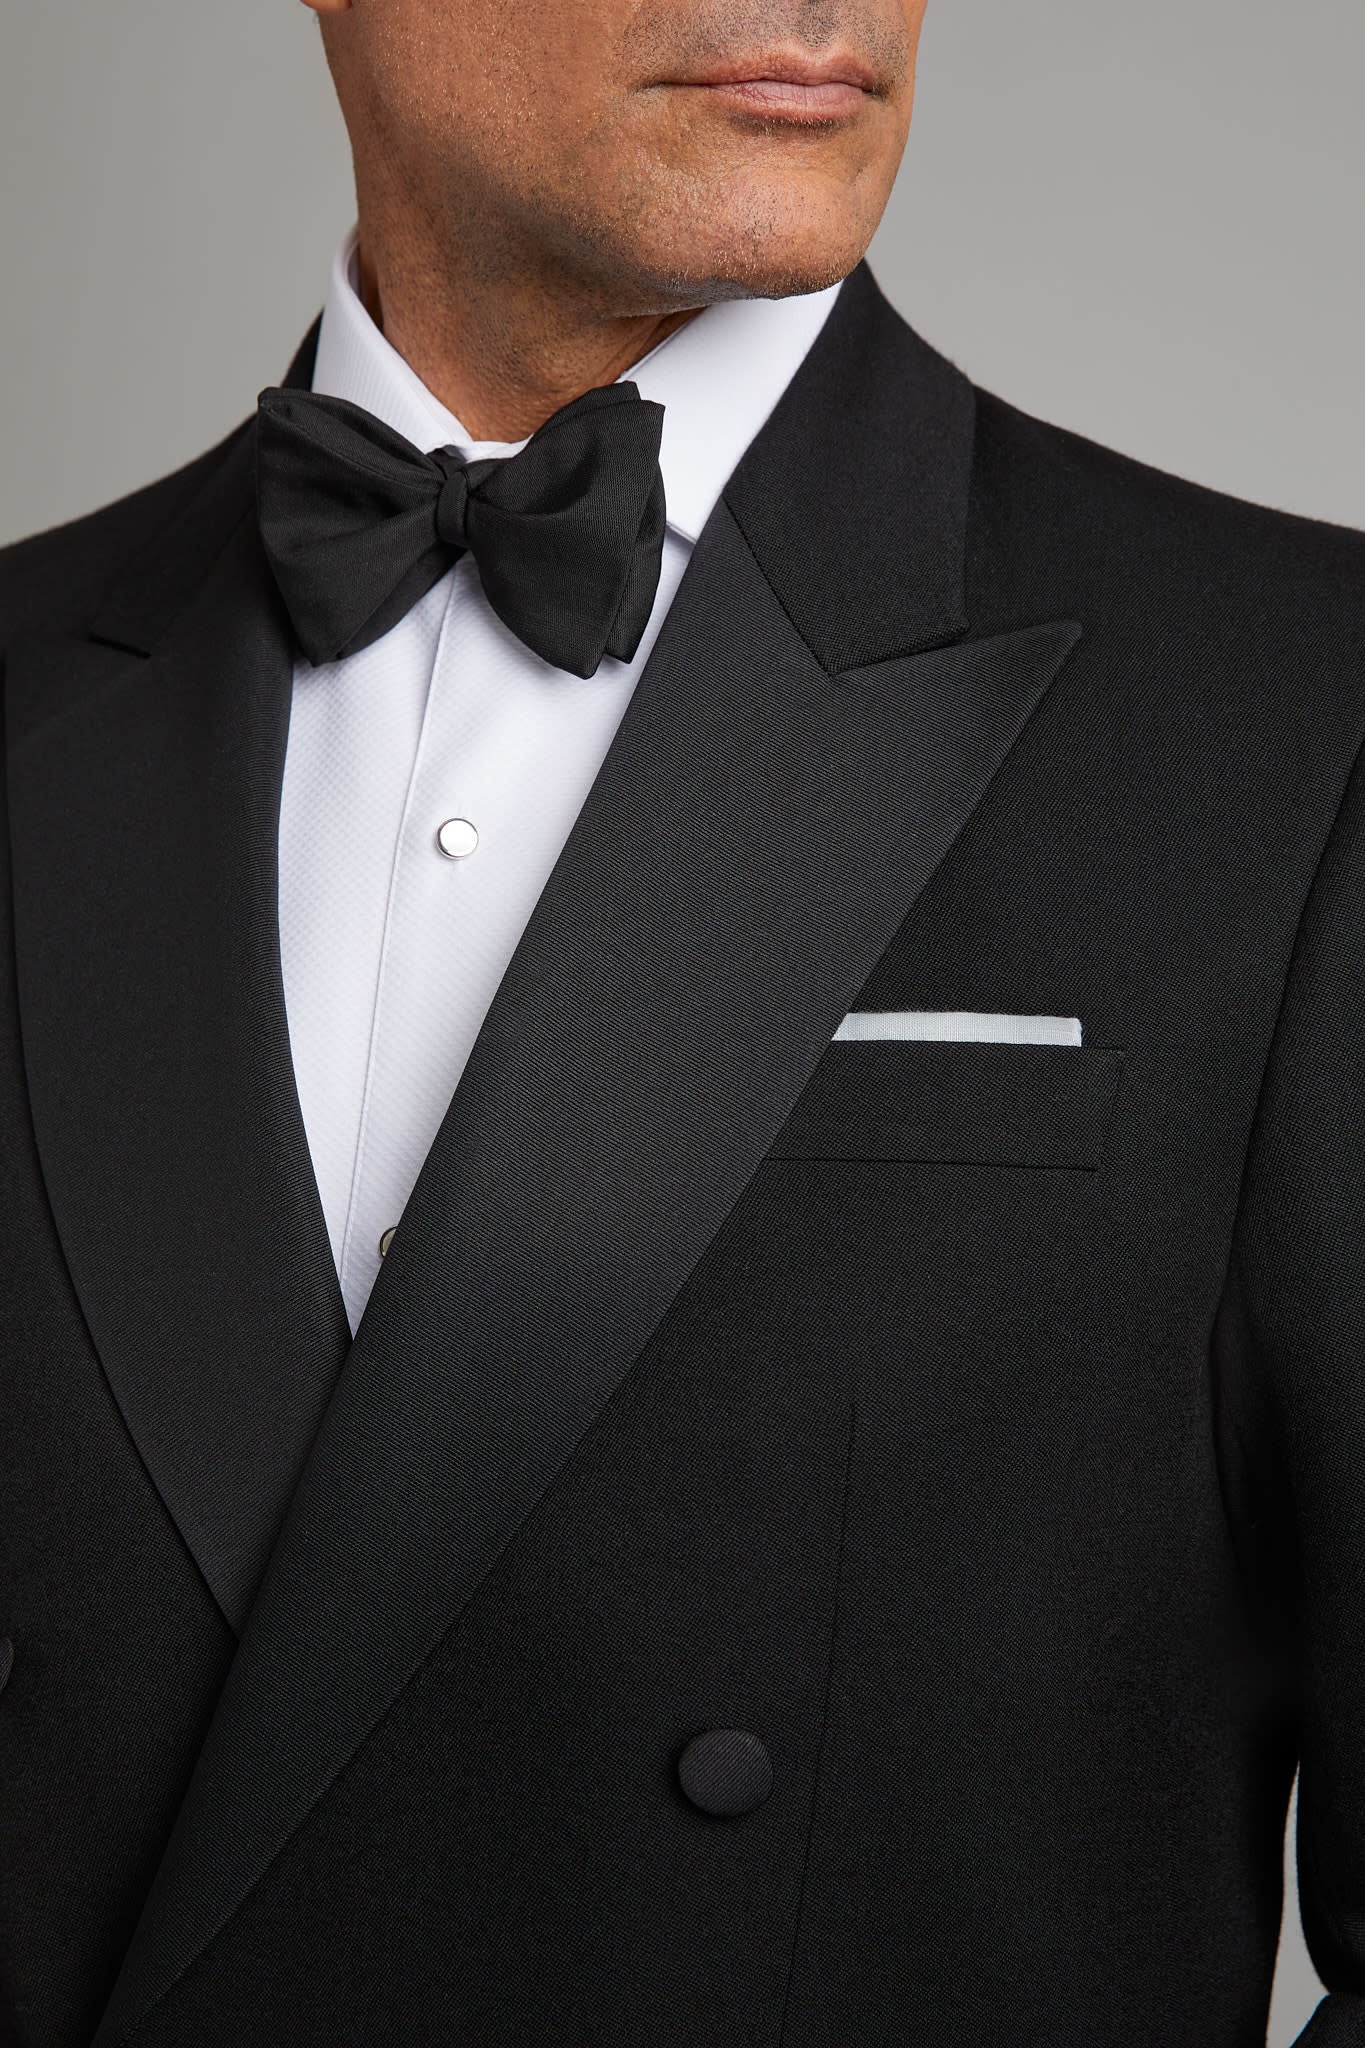 Double-Breasted Dinner Jacket Hire